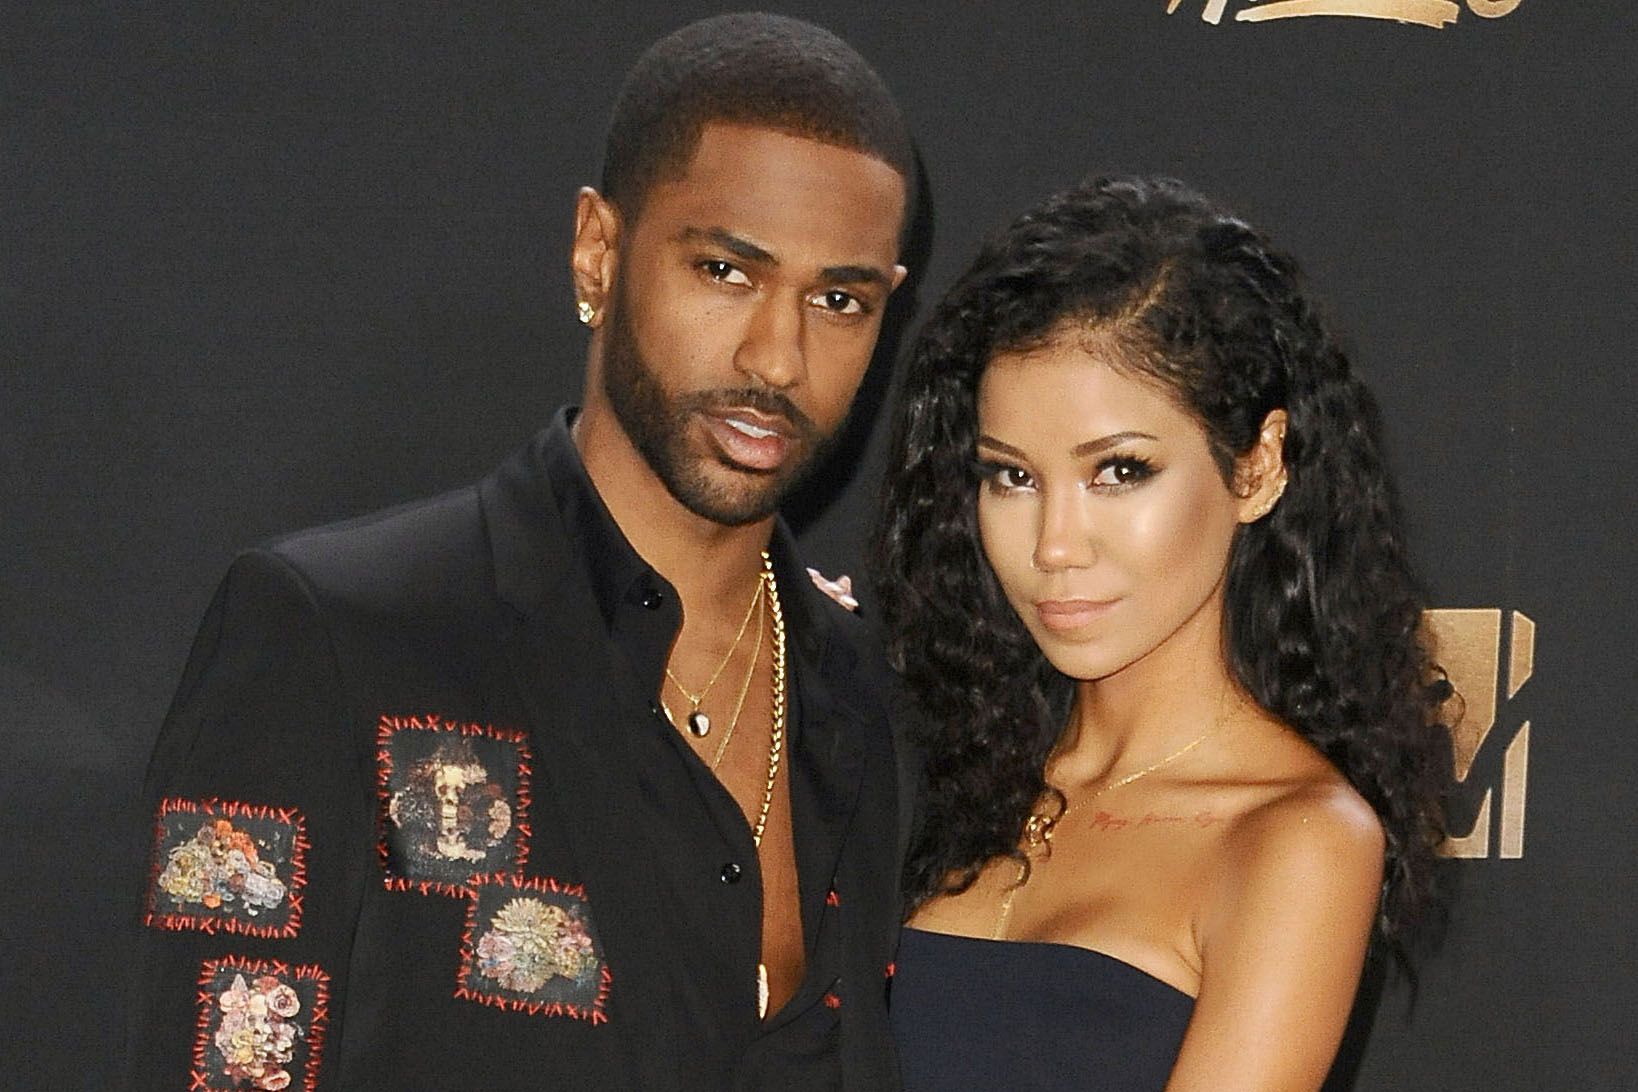 Jhené Aiko makes her love for Big Sean permanent with tattoo